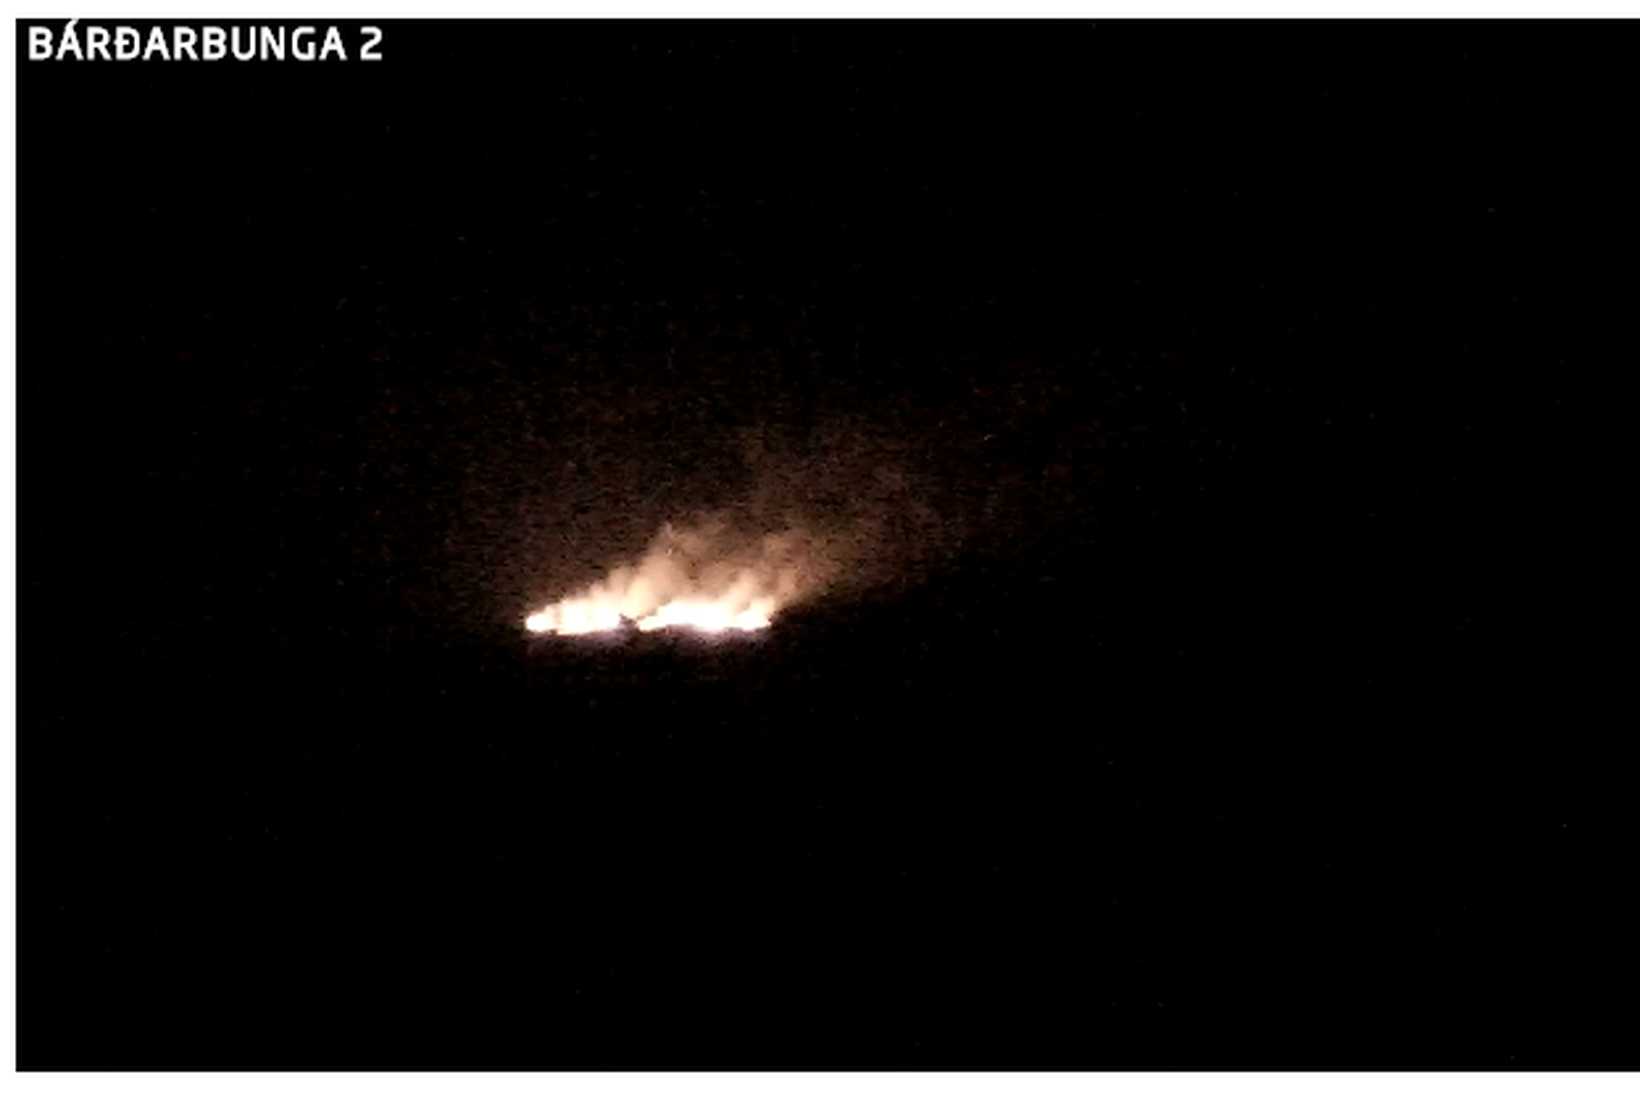 The eruption from webcam 2